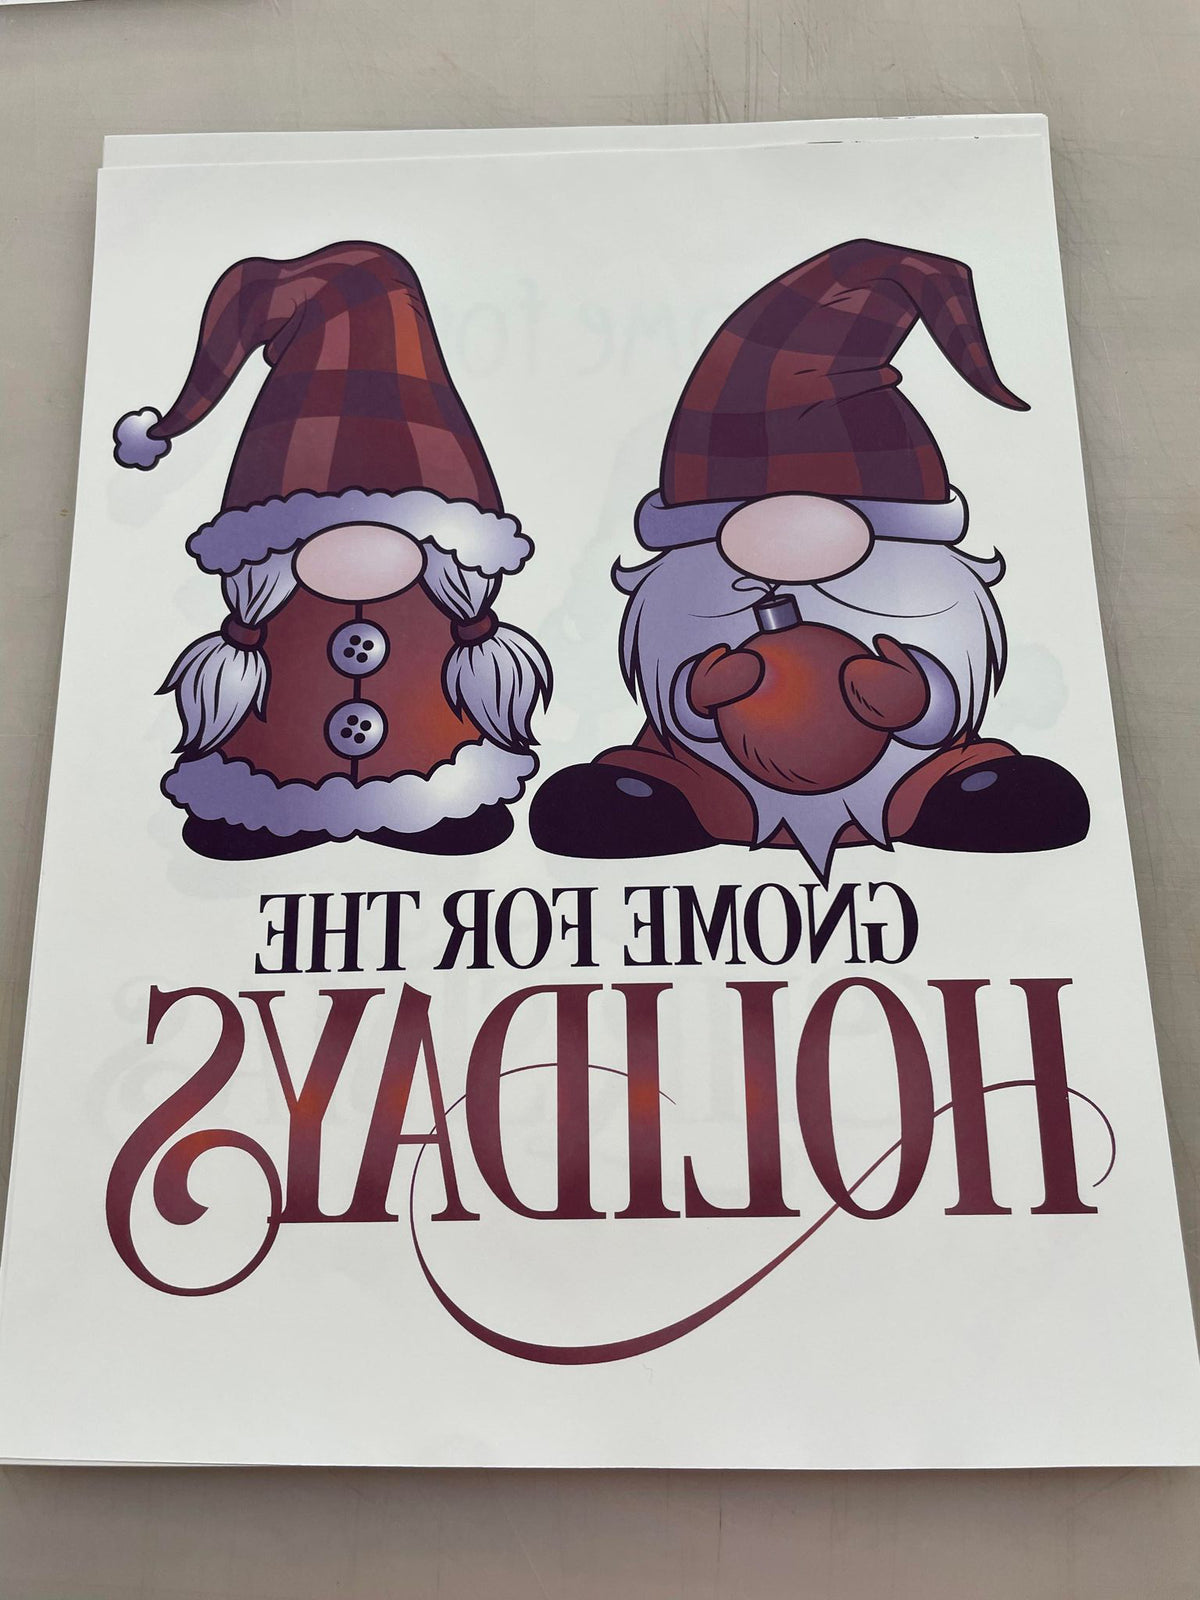 Gnome for the Holidays Sublimation Transfer